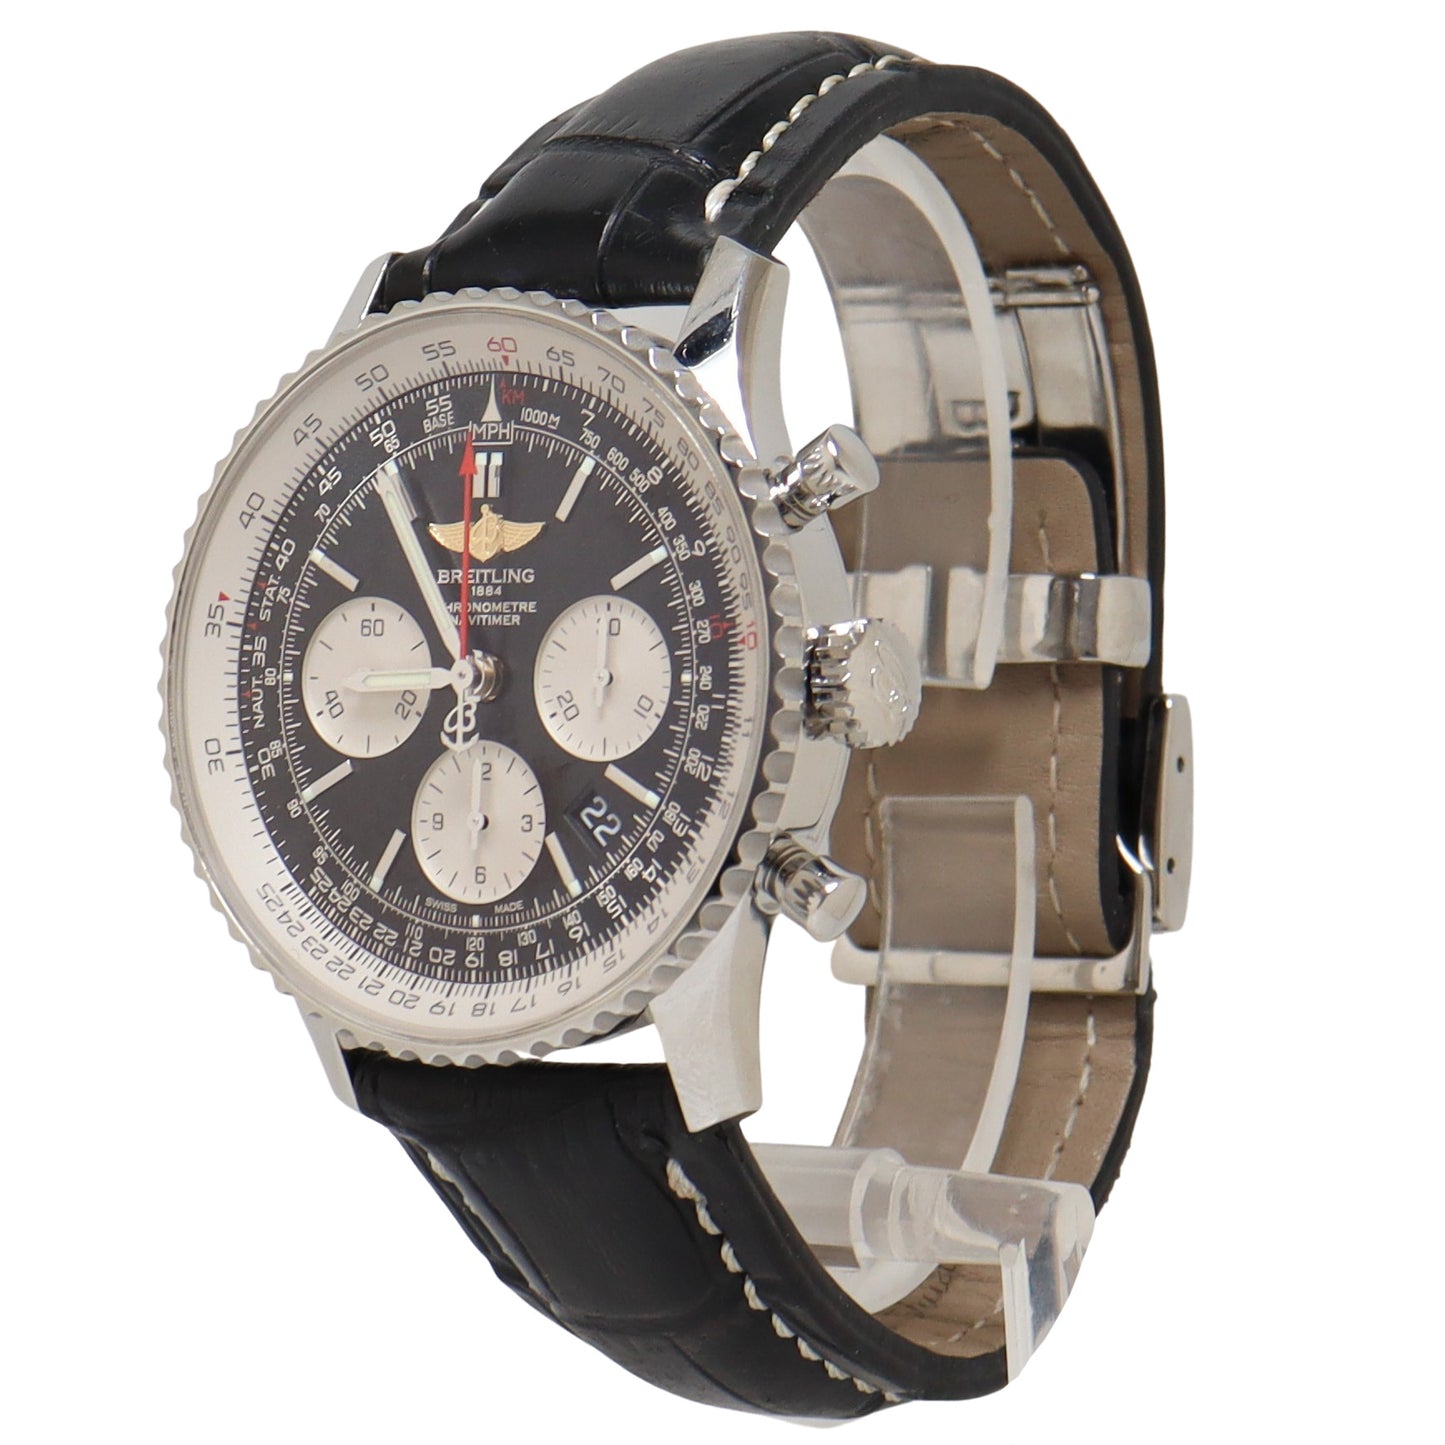 Breitling Navitimer Stainless Steel 42mm Black Chronograph Dial Watch Reference #: AB0120 - Happy Jewelers Fine Jewelry Lifetime Warranty